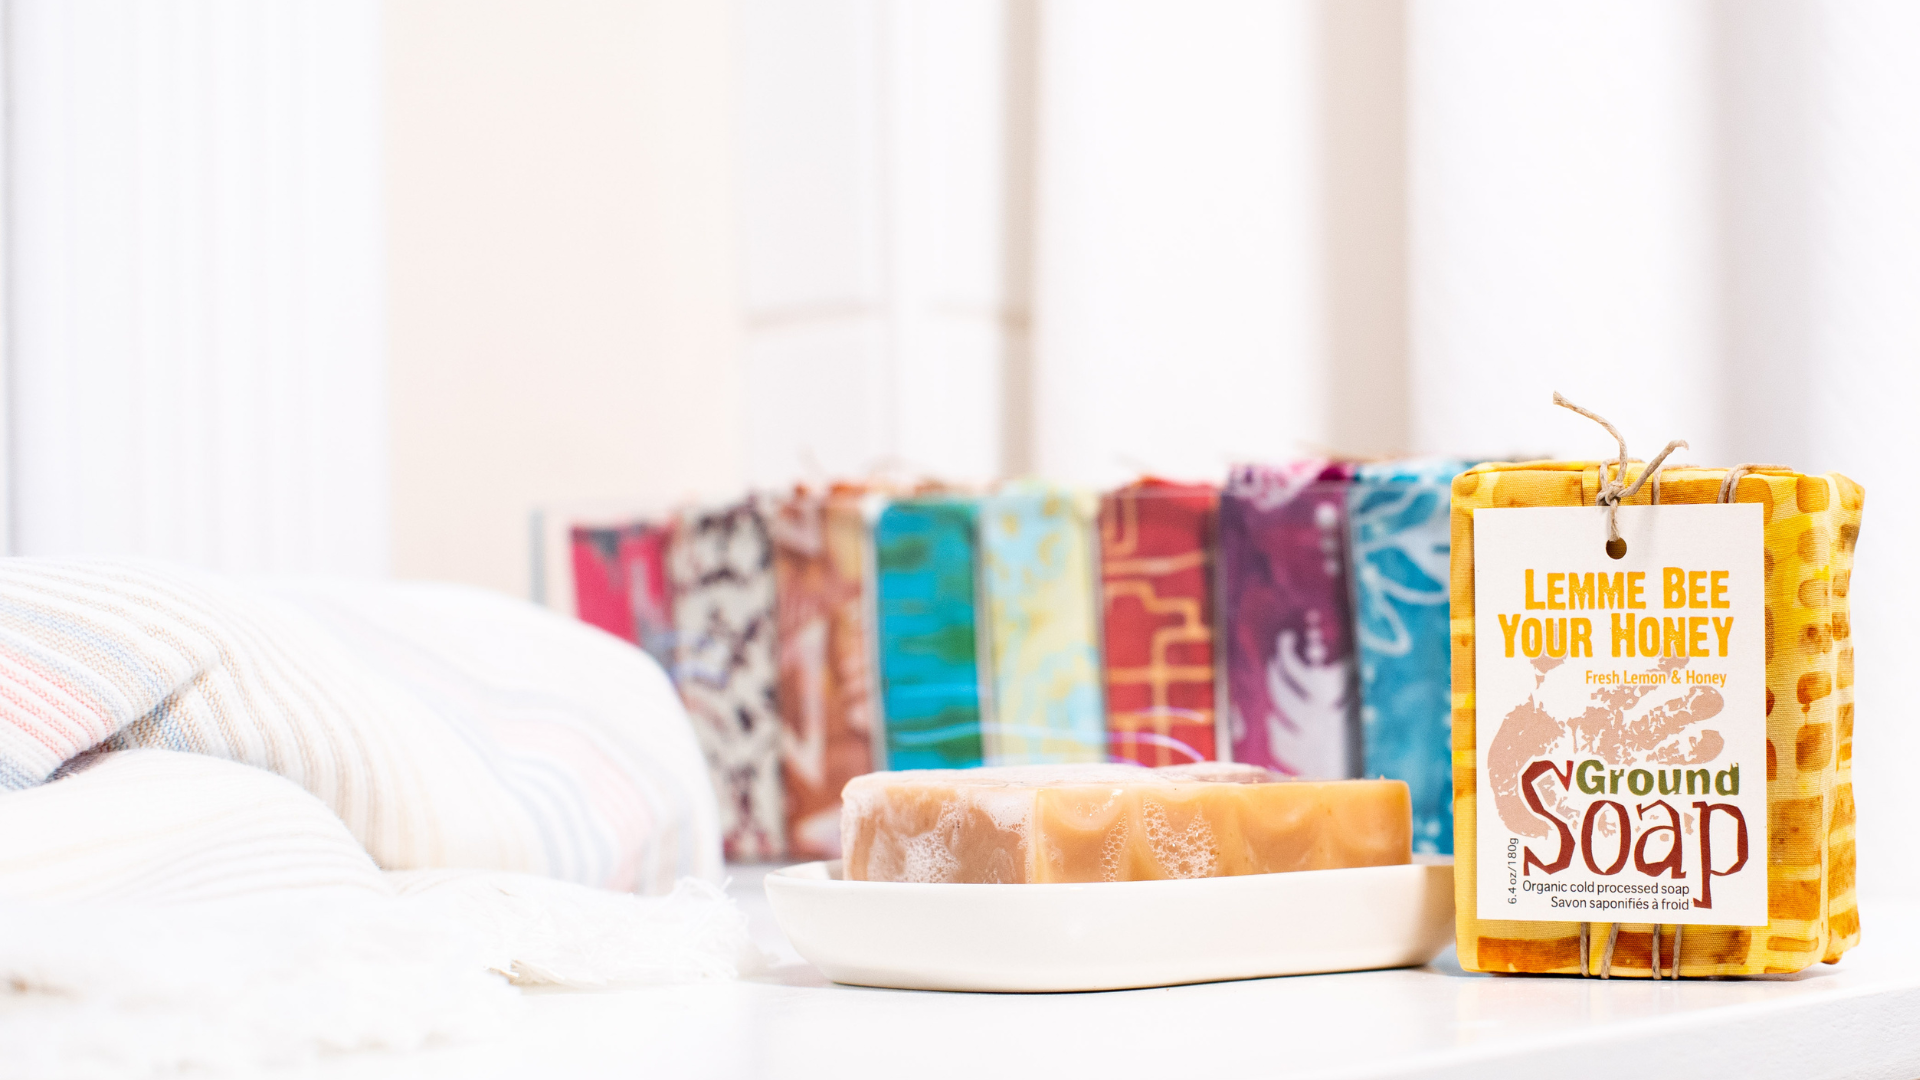 Collection of Ground Soap featuring Lemme Bee Your Honey which has fresh lemon & honey.